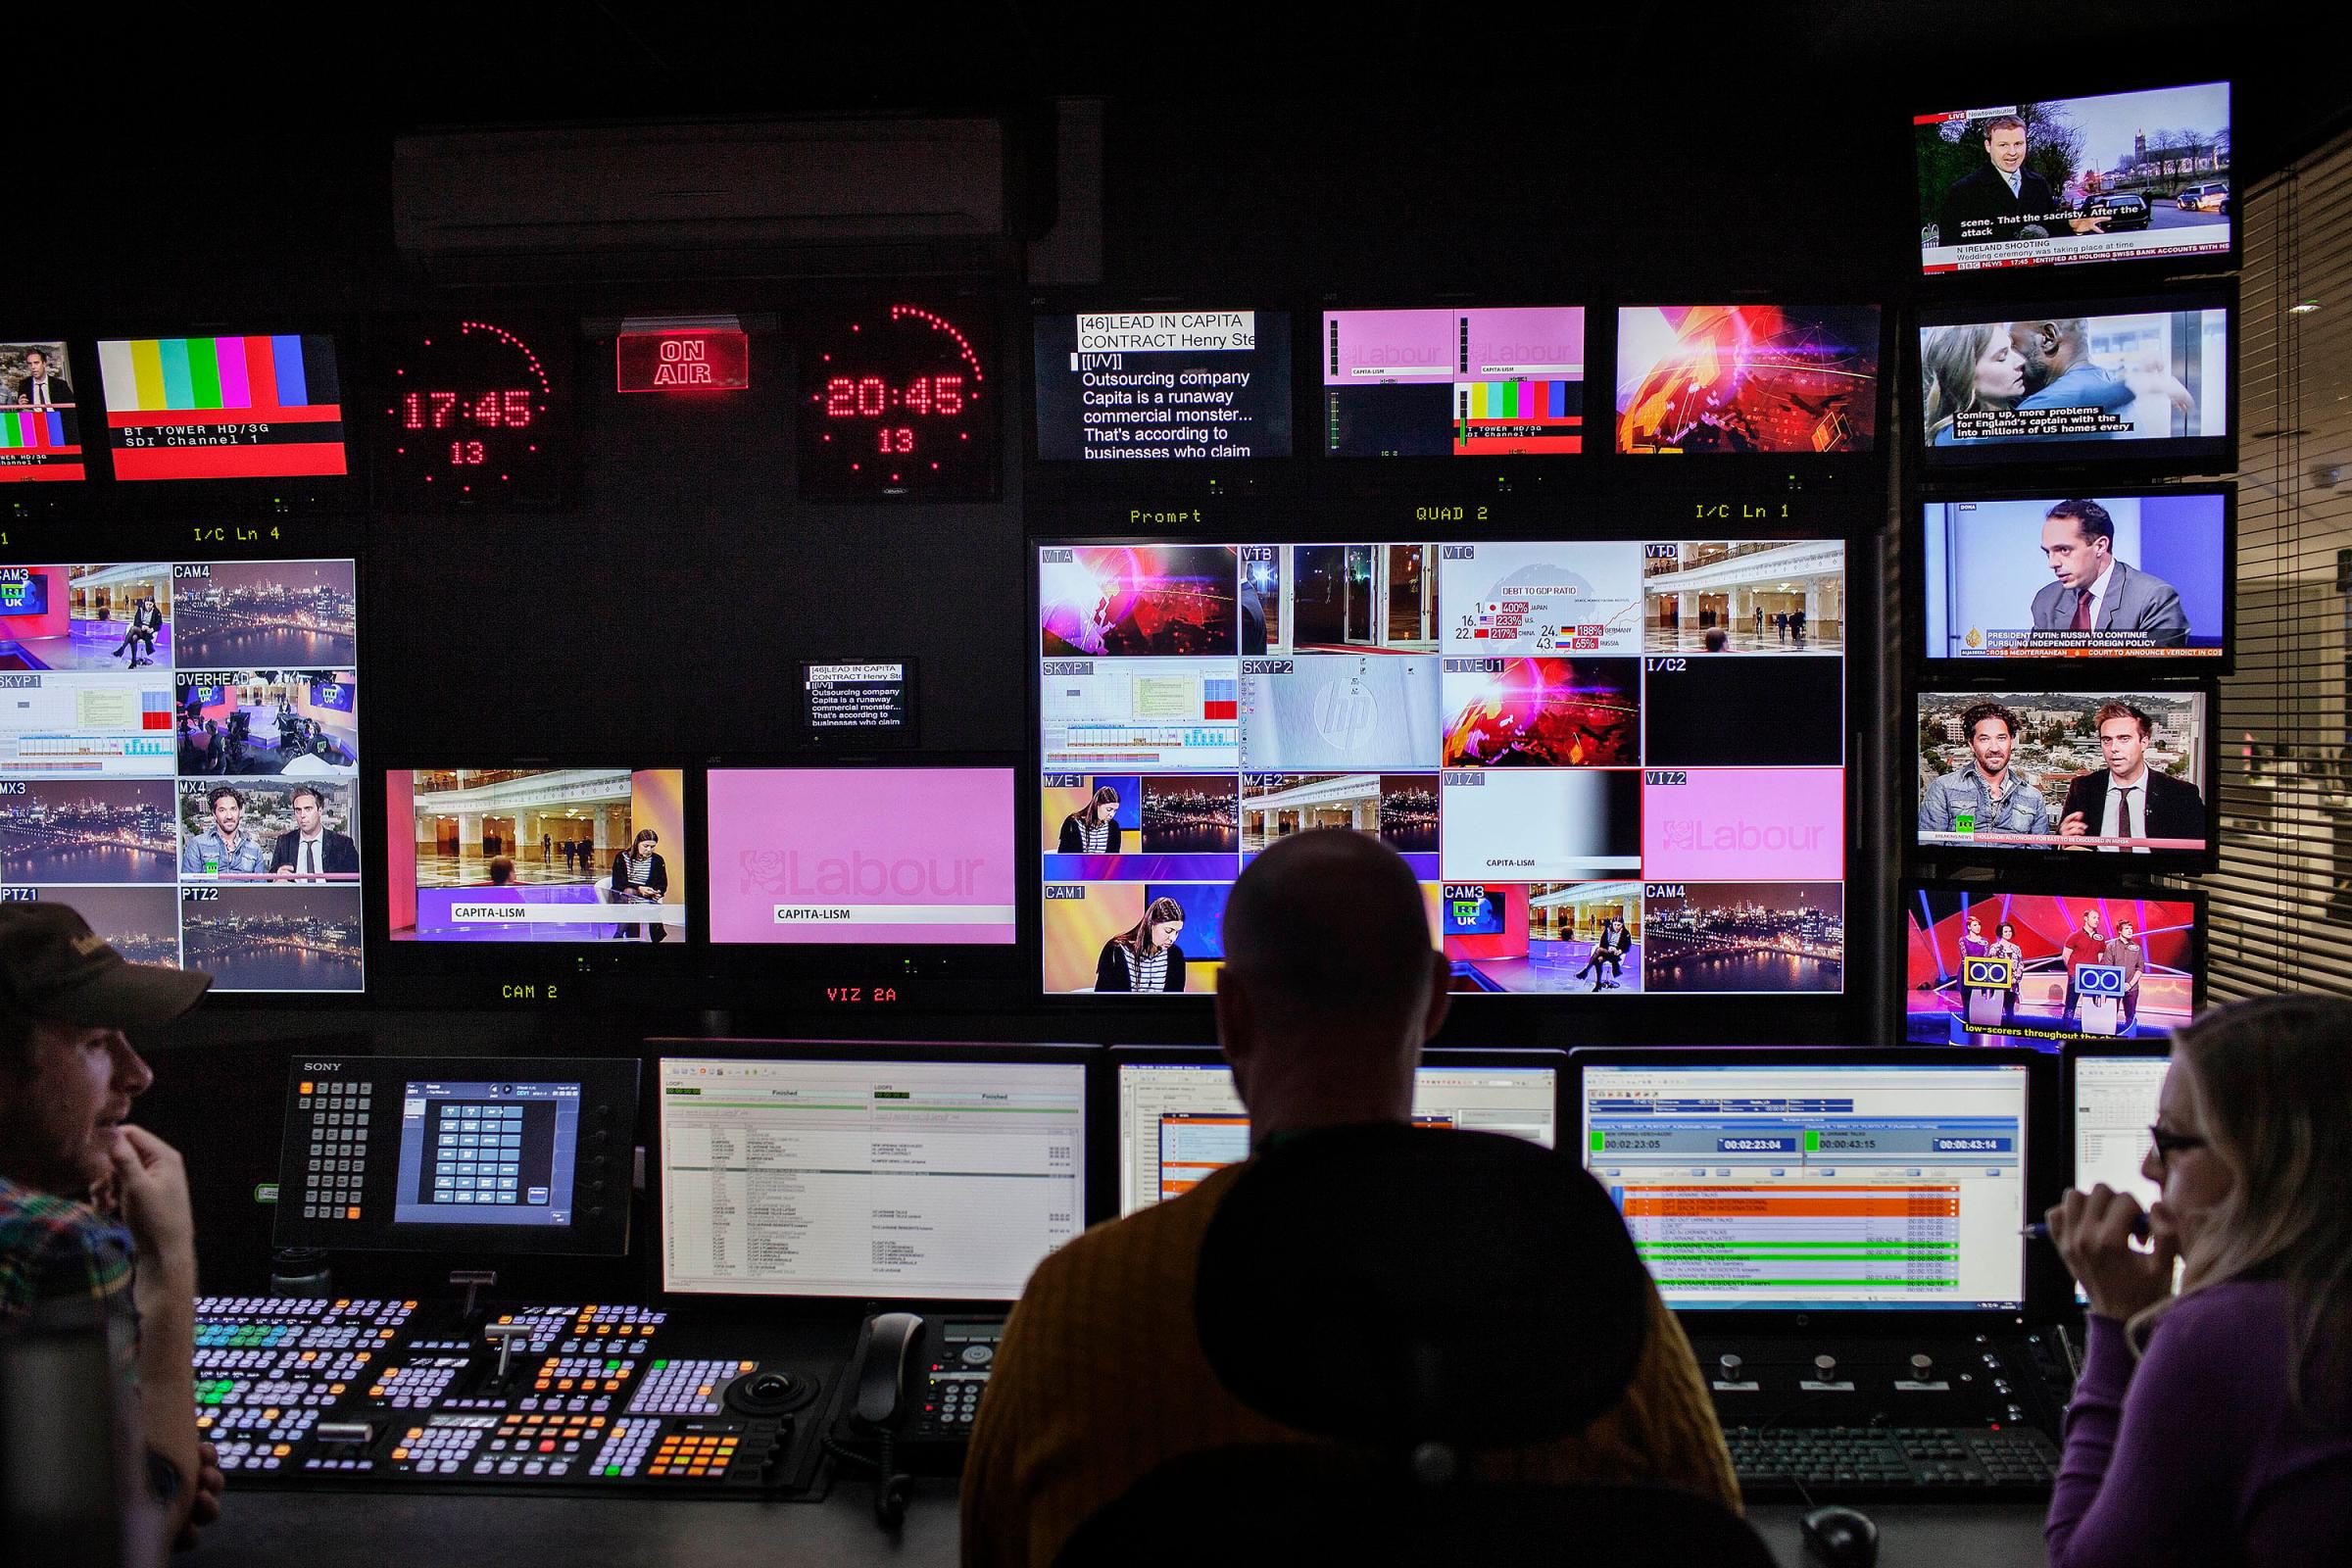 Production staff in the control room of RT’s London studios.